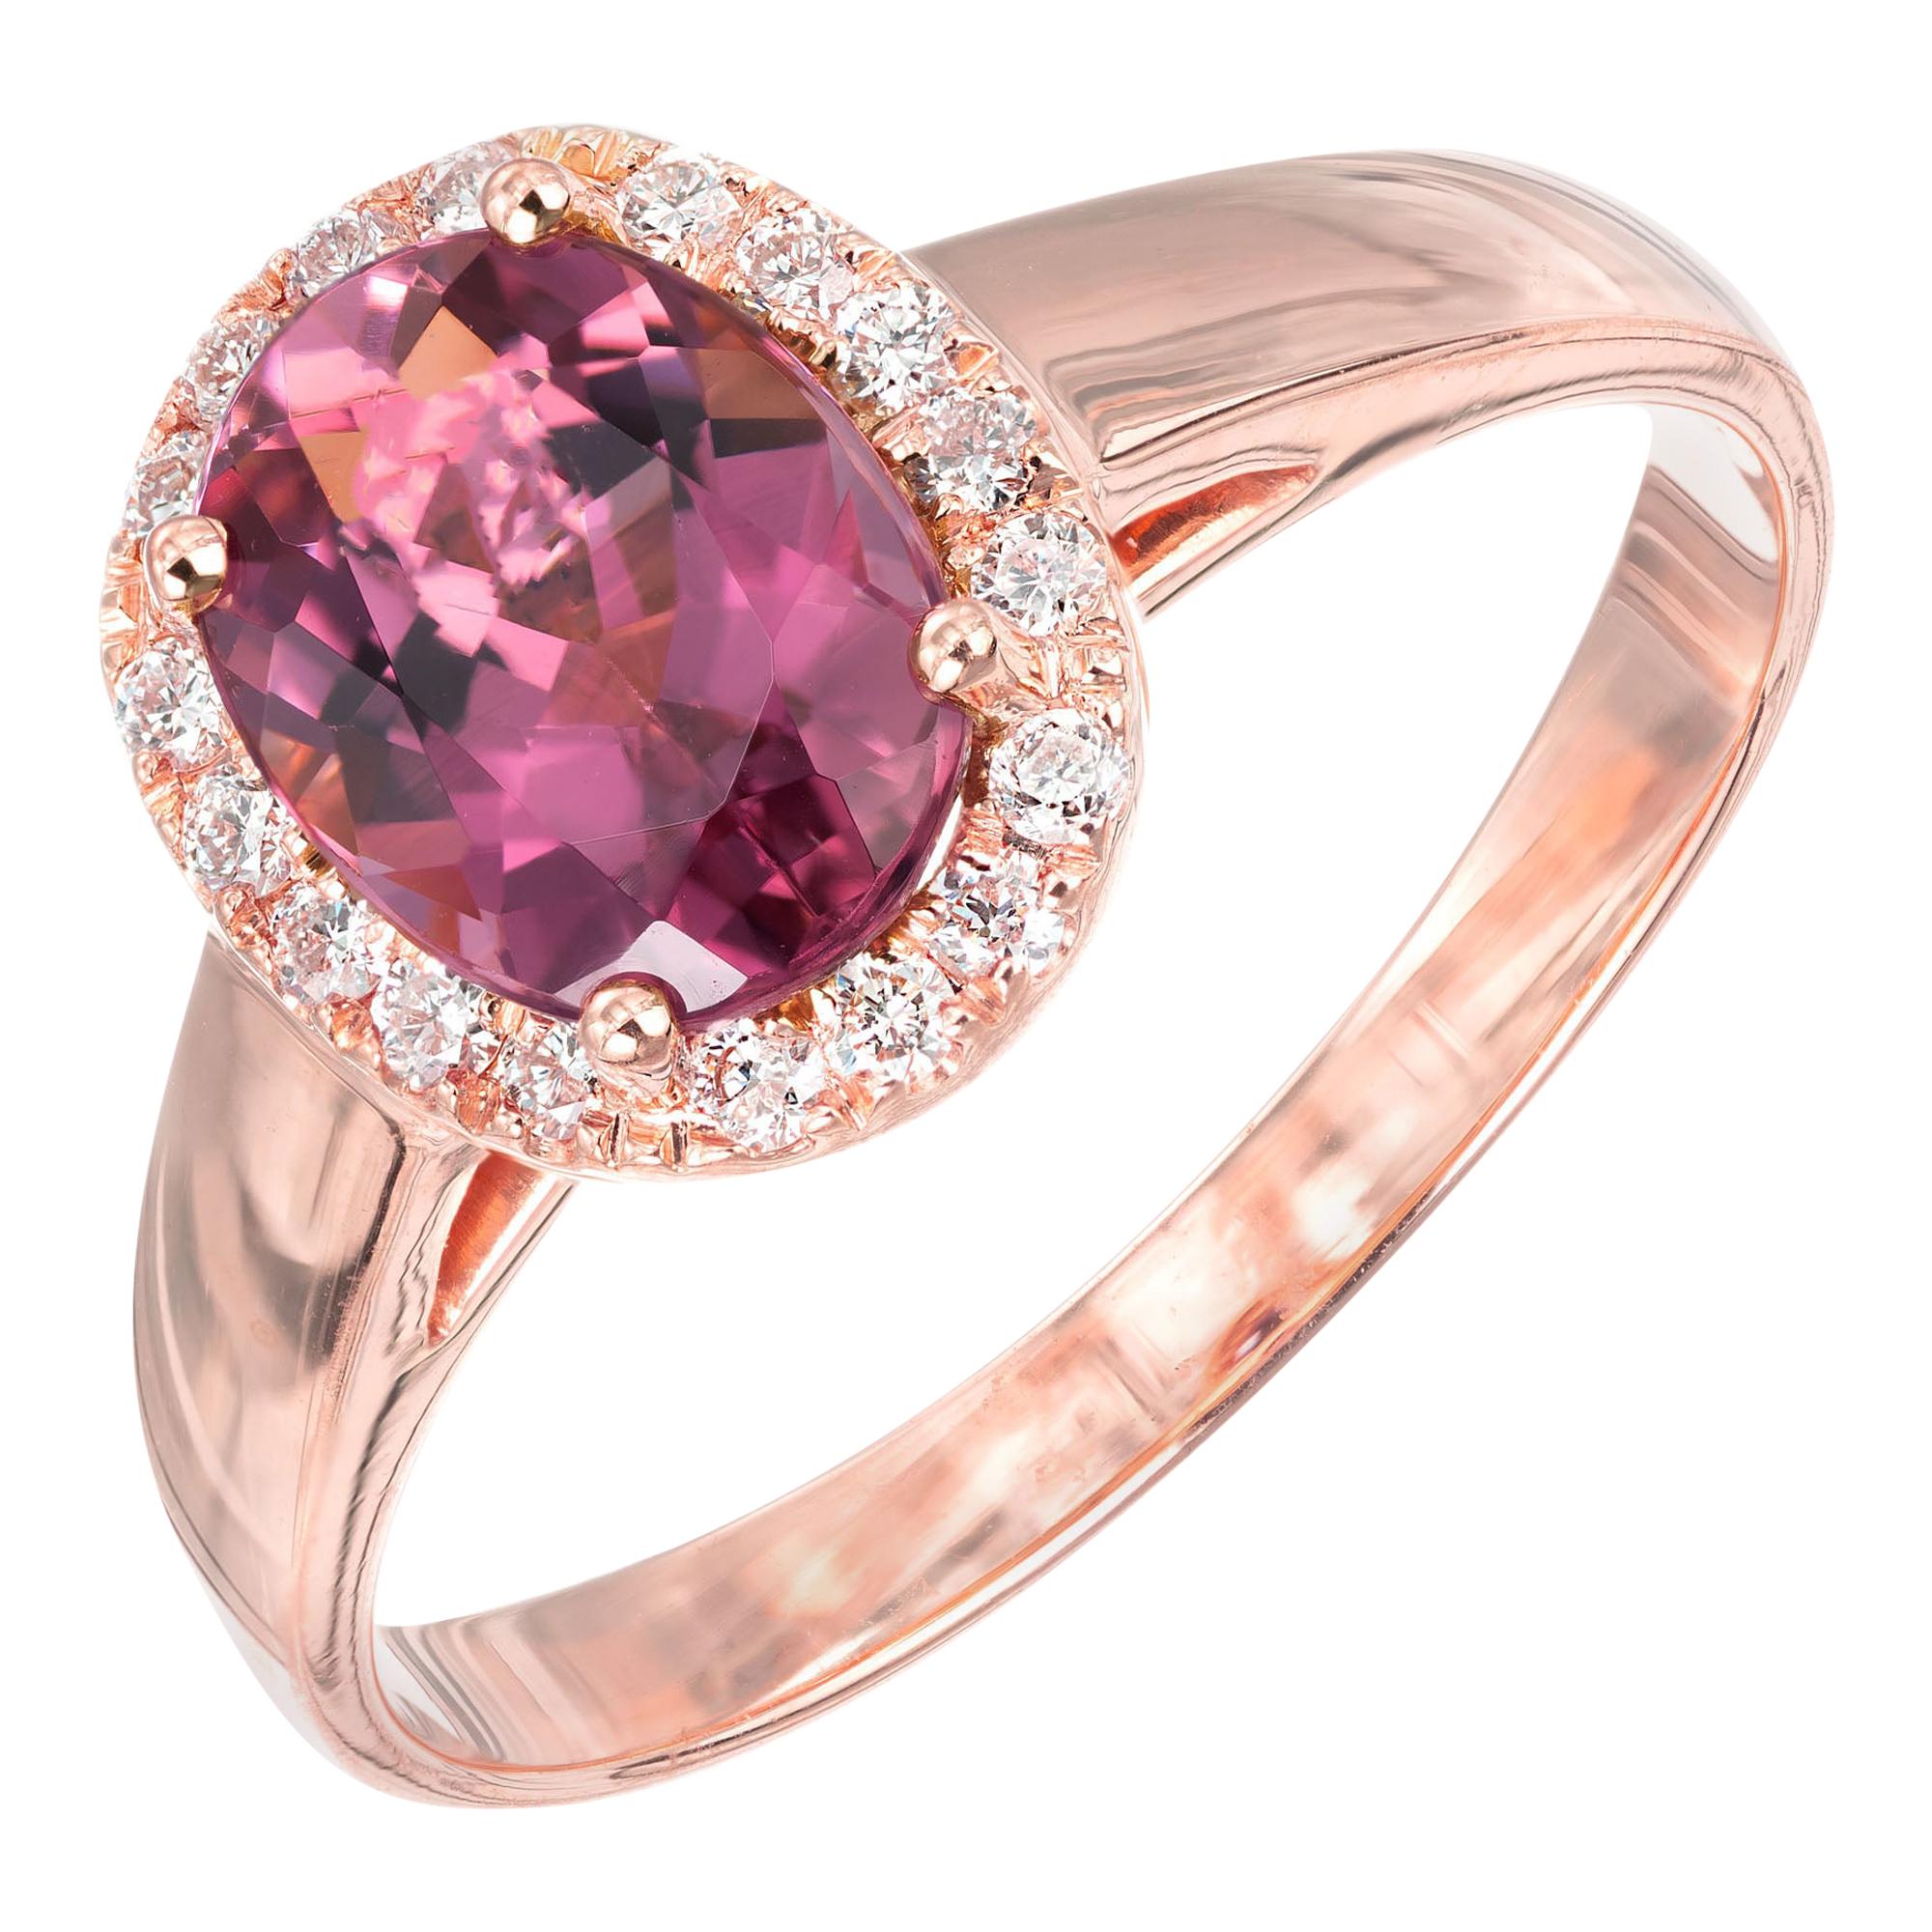 Peter Suchy 1.20 Carat Pink Tourmaline Diamond Halo Rose Gold Engagement Ring For Sale